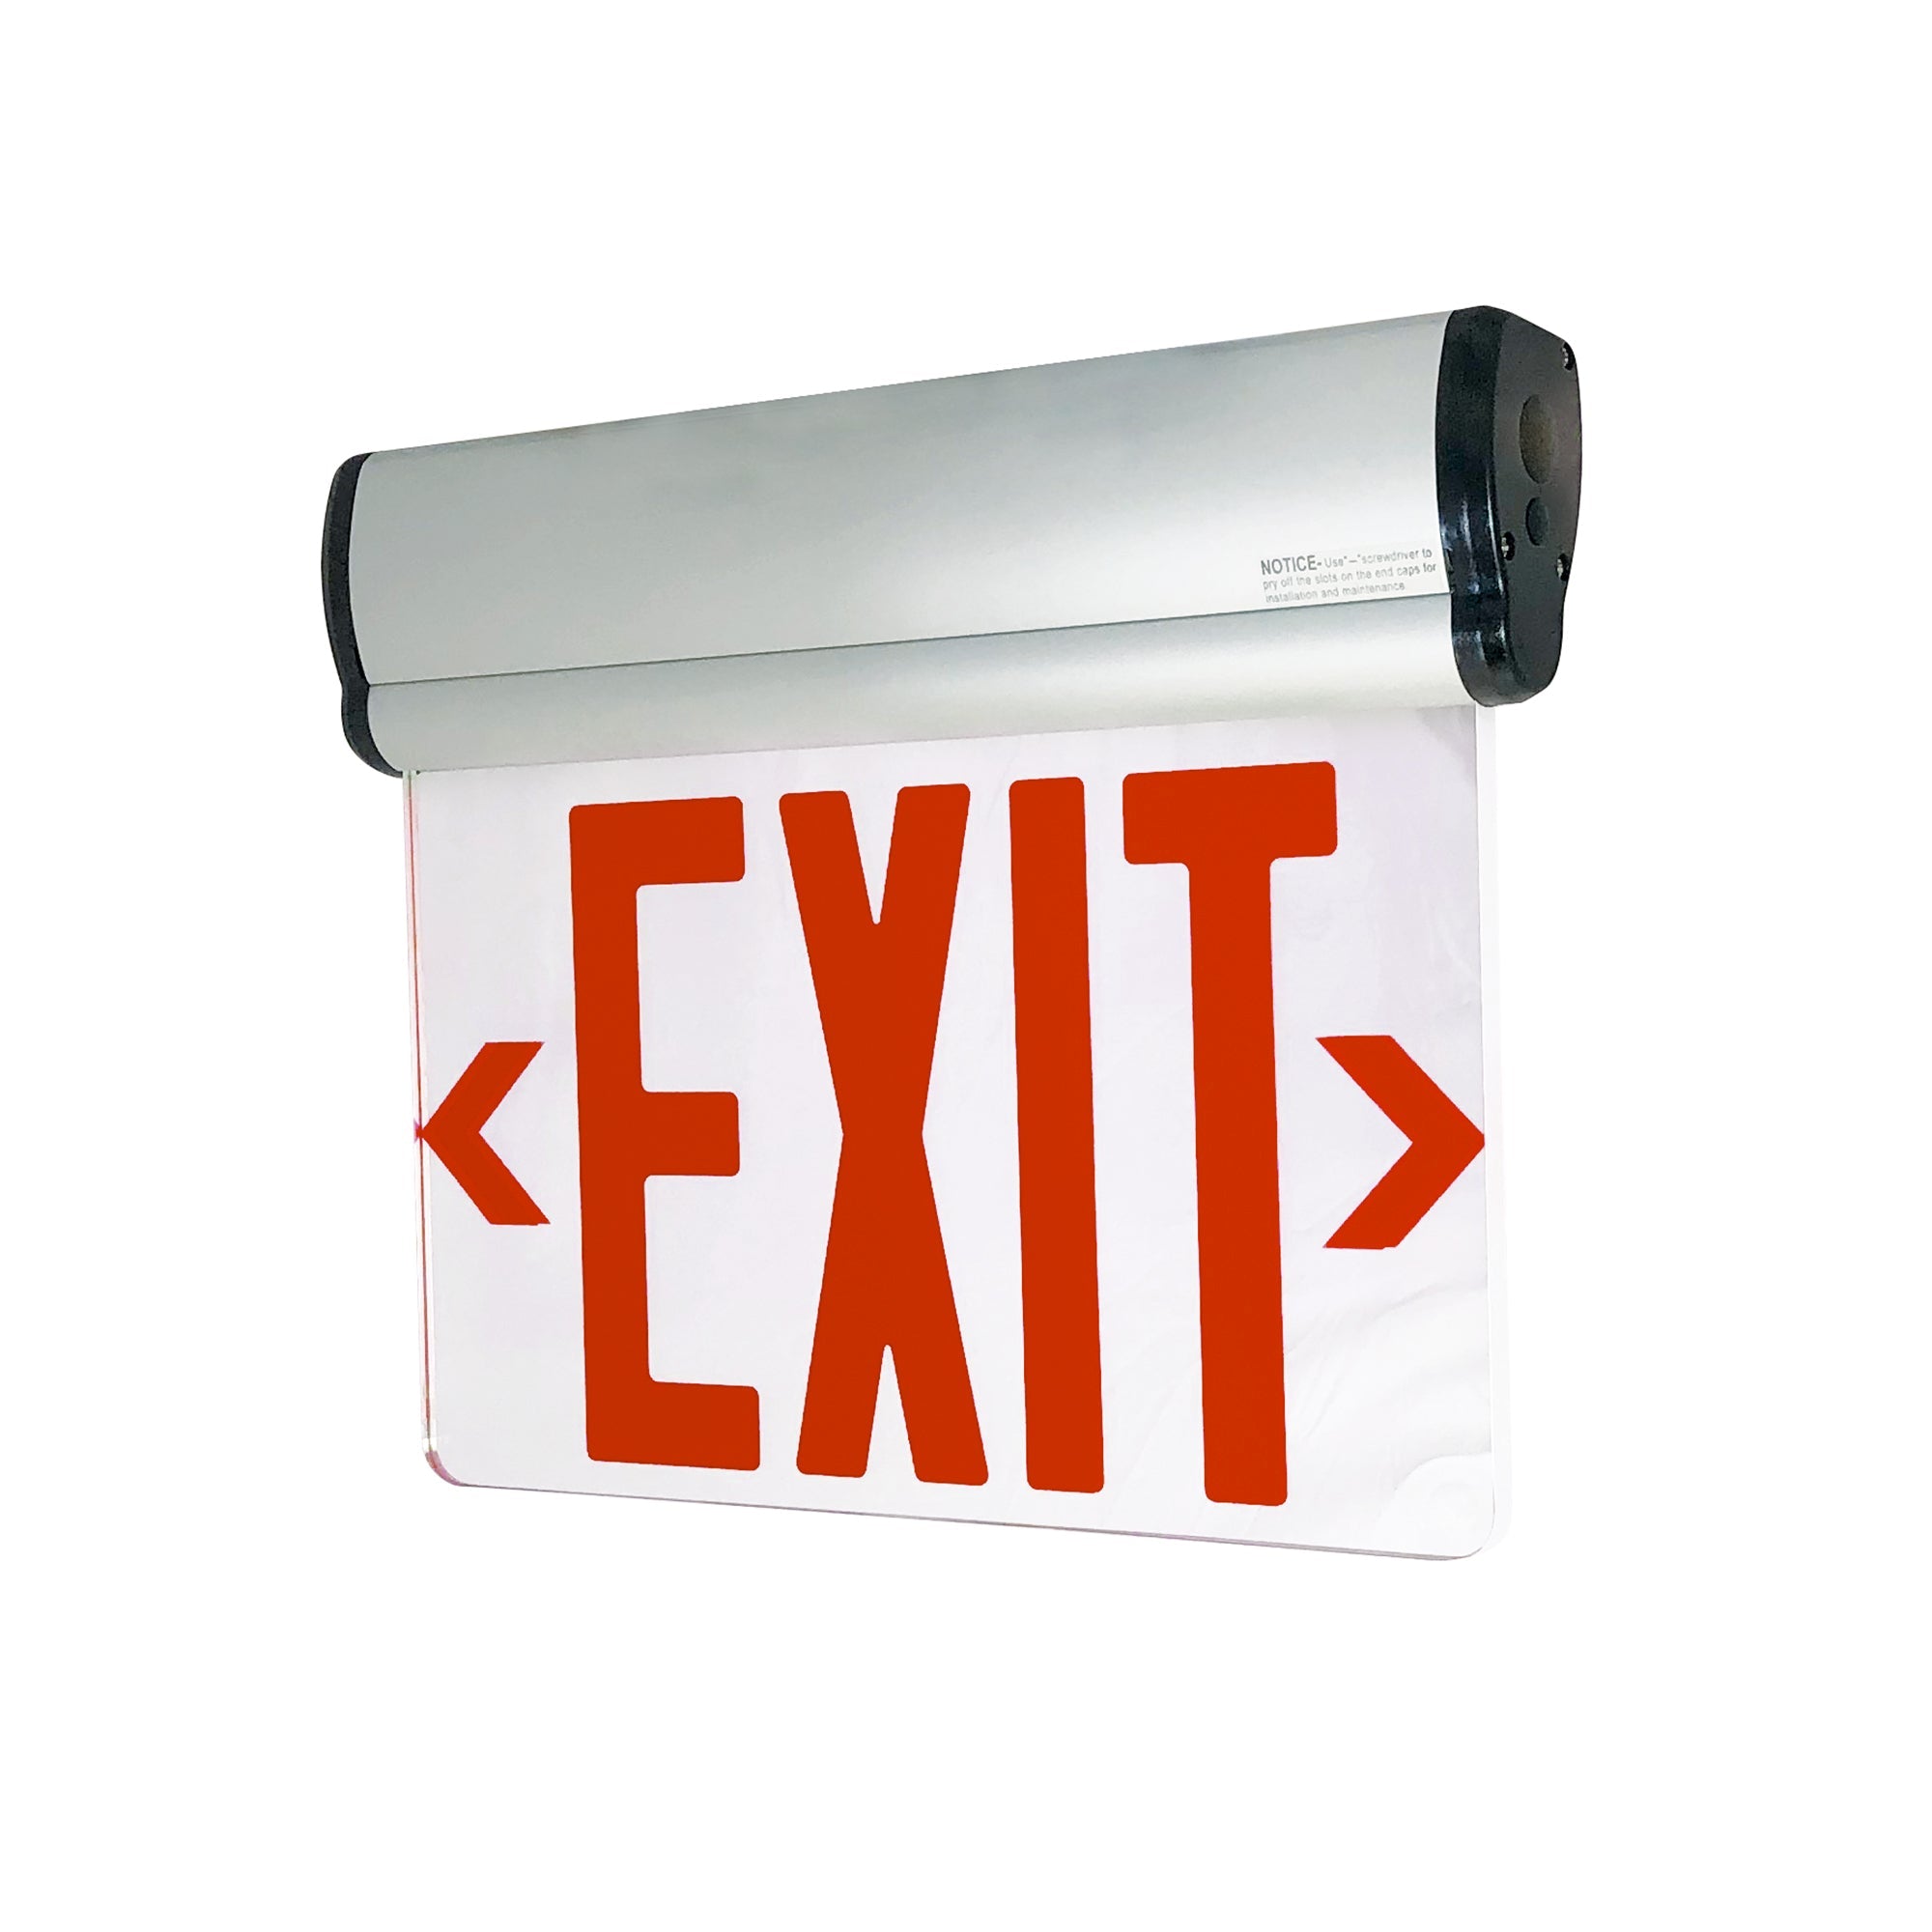 Nora Lighting NX-810-LEDR2MA - Exit / Emergency - Surface Adjustable LED Edge-Lit Exit Sign, AC Only, 6 Inch Red Letters, Double Face / Mirrored Acrylic, Aluminum Housing